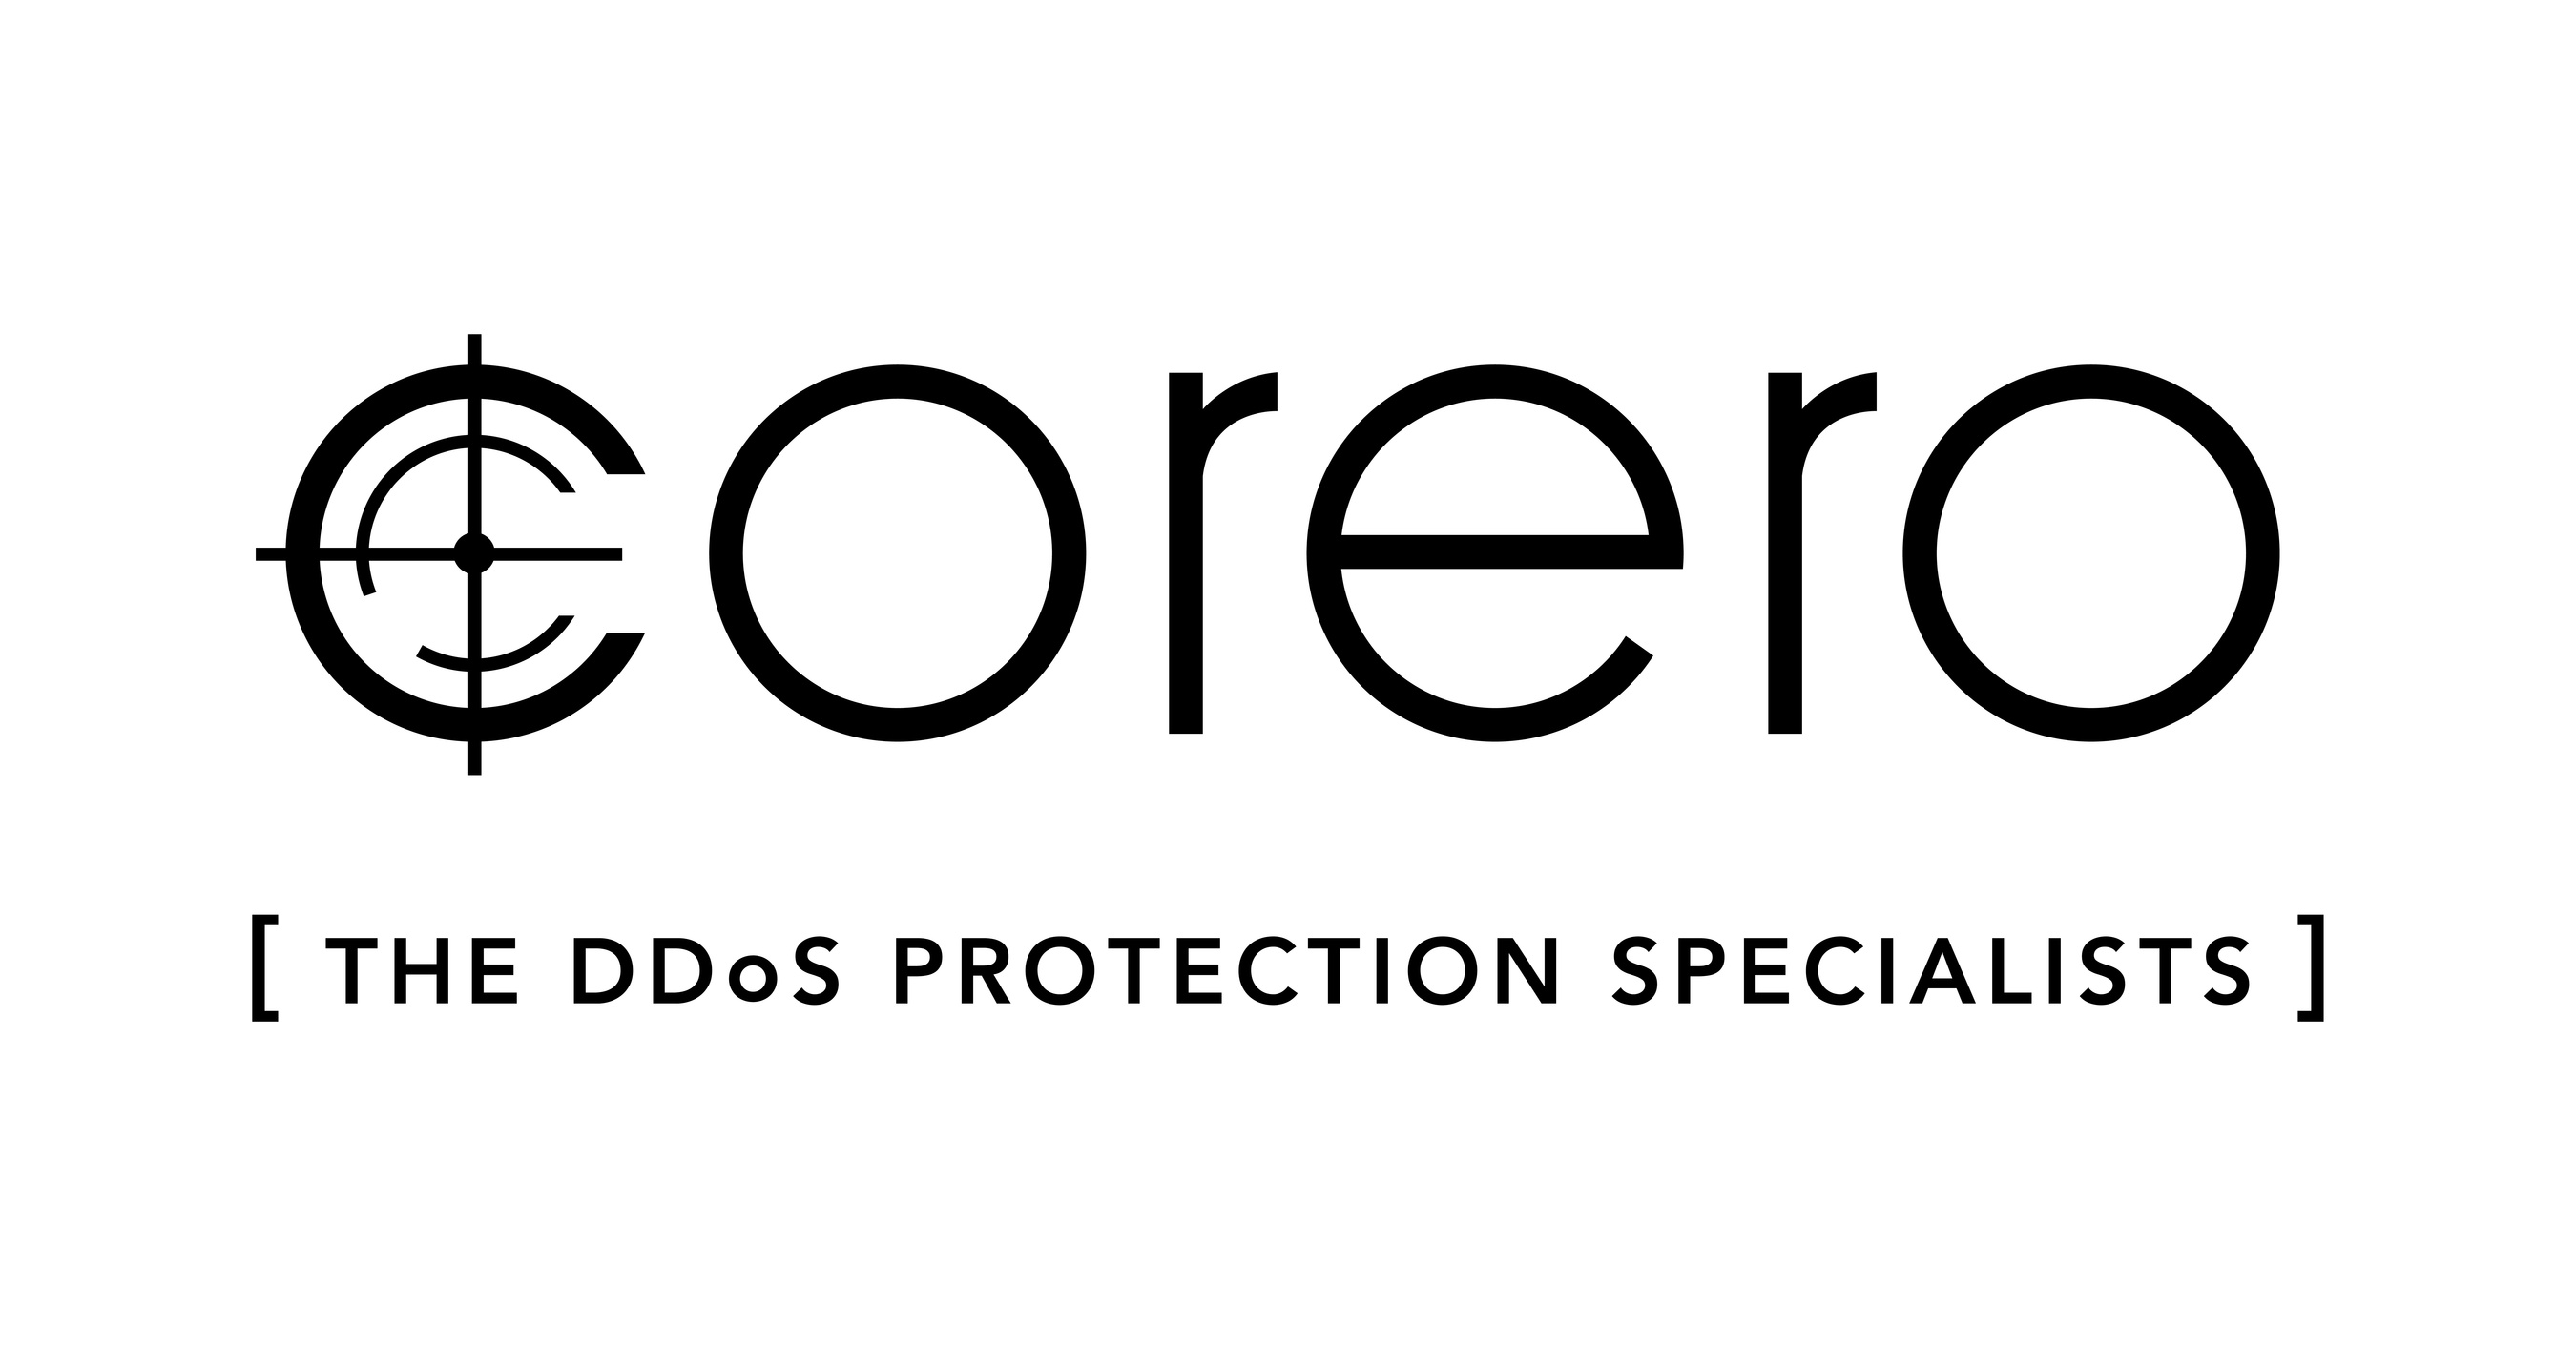 A2 Hosting Expands Commitment to DDoS Protection with Corero Network Security